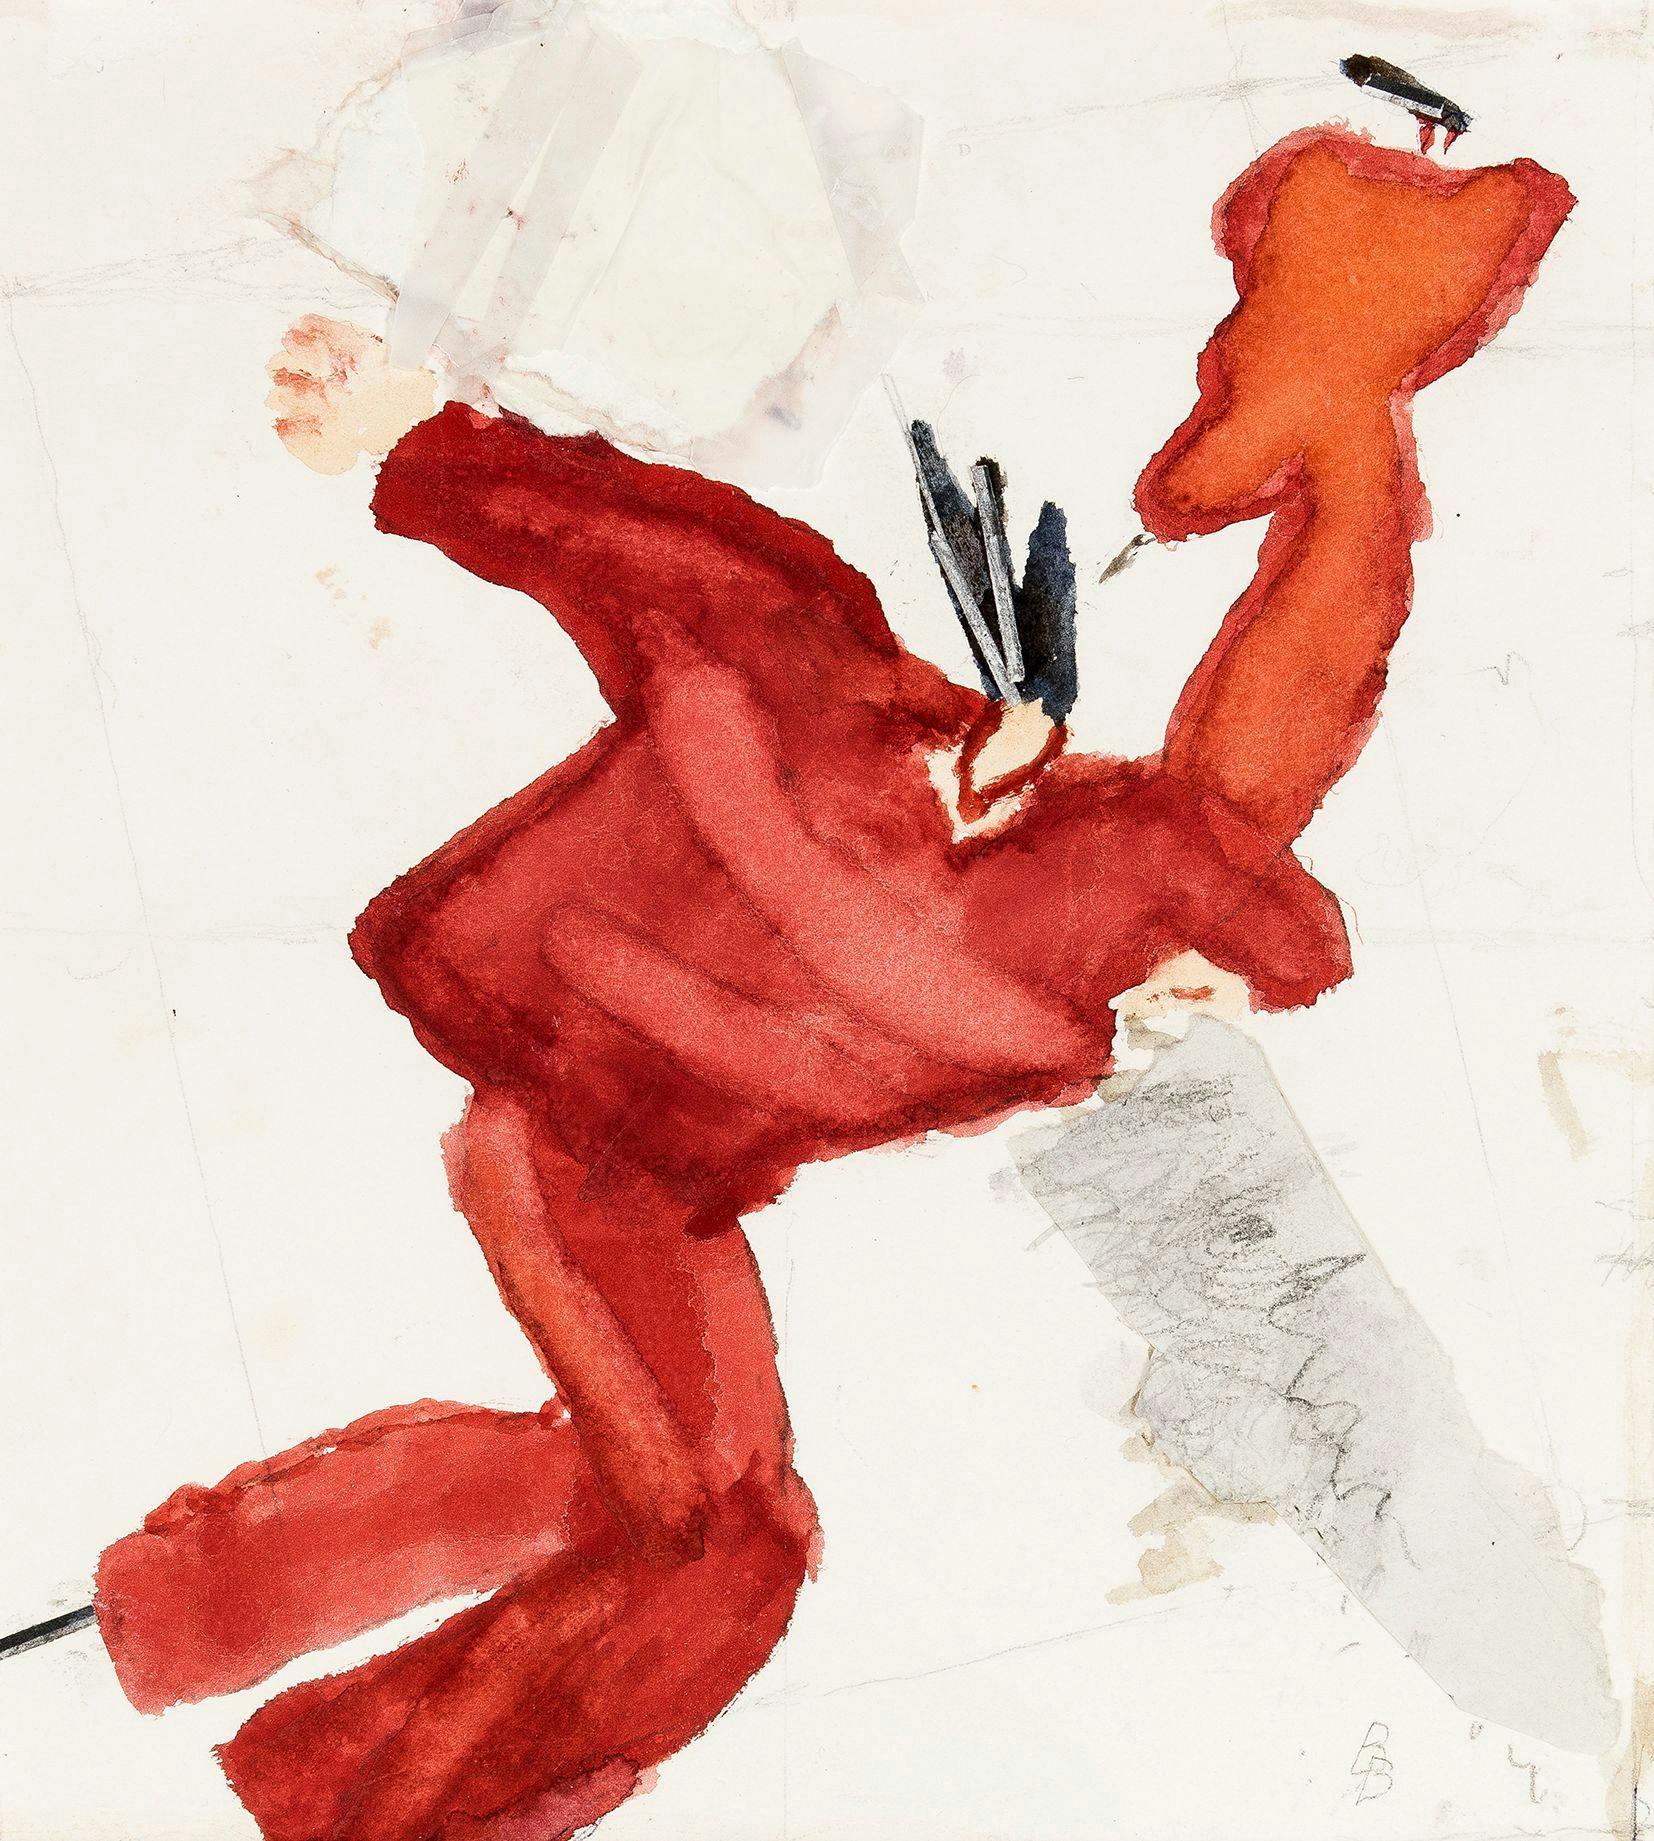 Artwork by Birgit Brom depicting two skating rinks in red against a white background. Watercolor and collage.